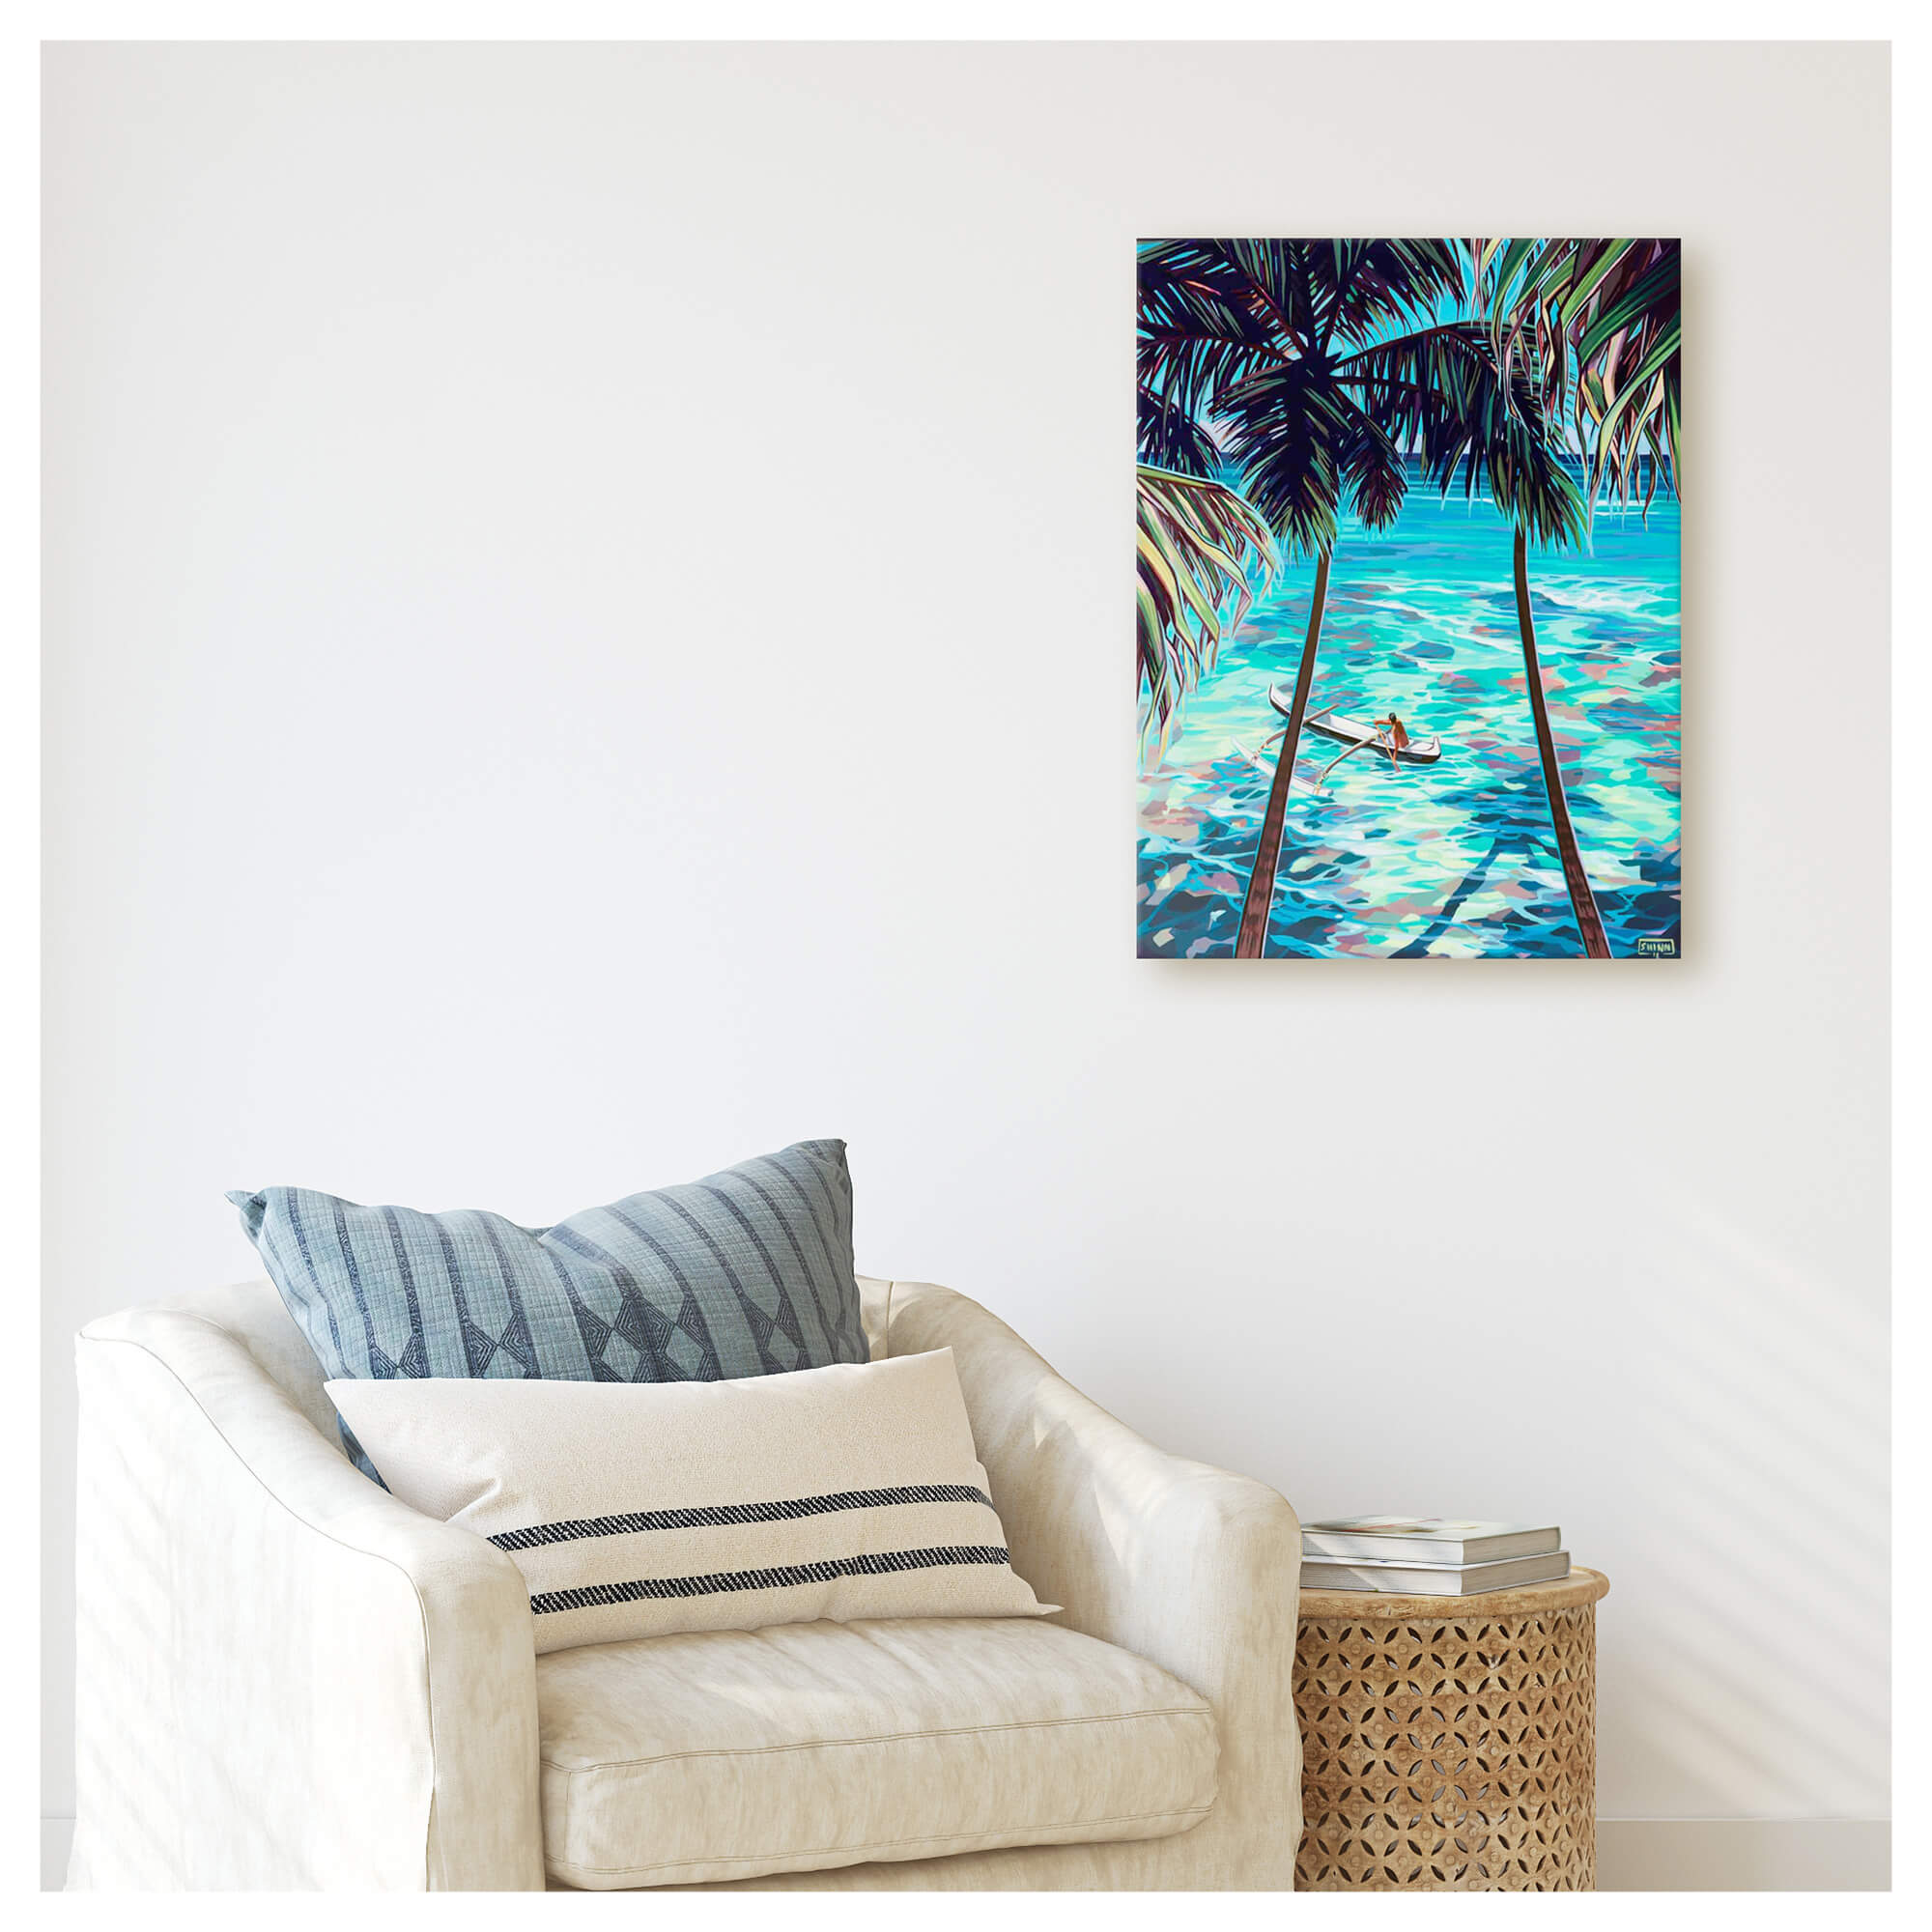 A canvas giclée art print of a paddler in an outrigger canoe amongst the blue hues of the ocean and a palm tree oasis by Hawaii artist Christie Shinn